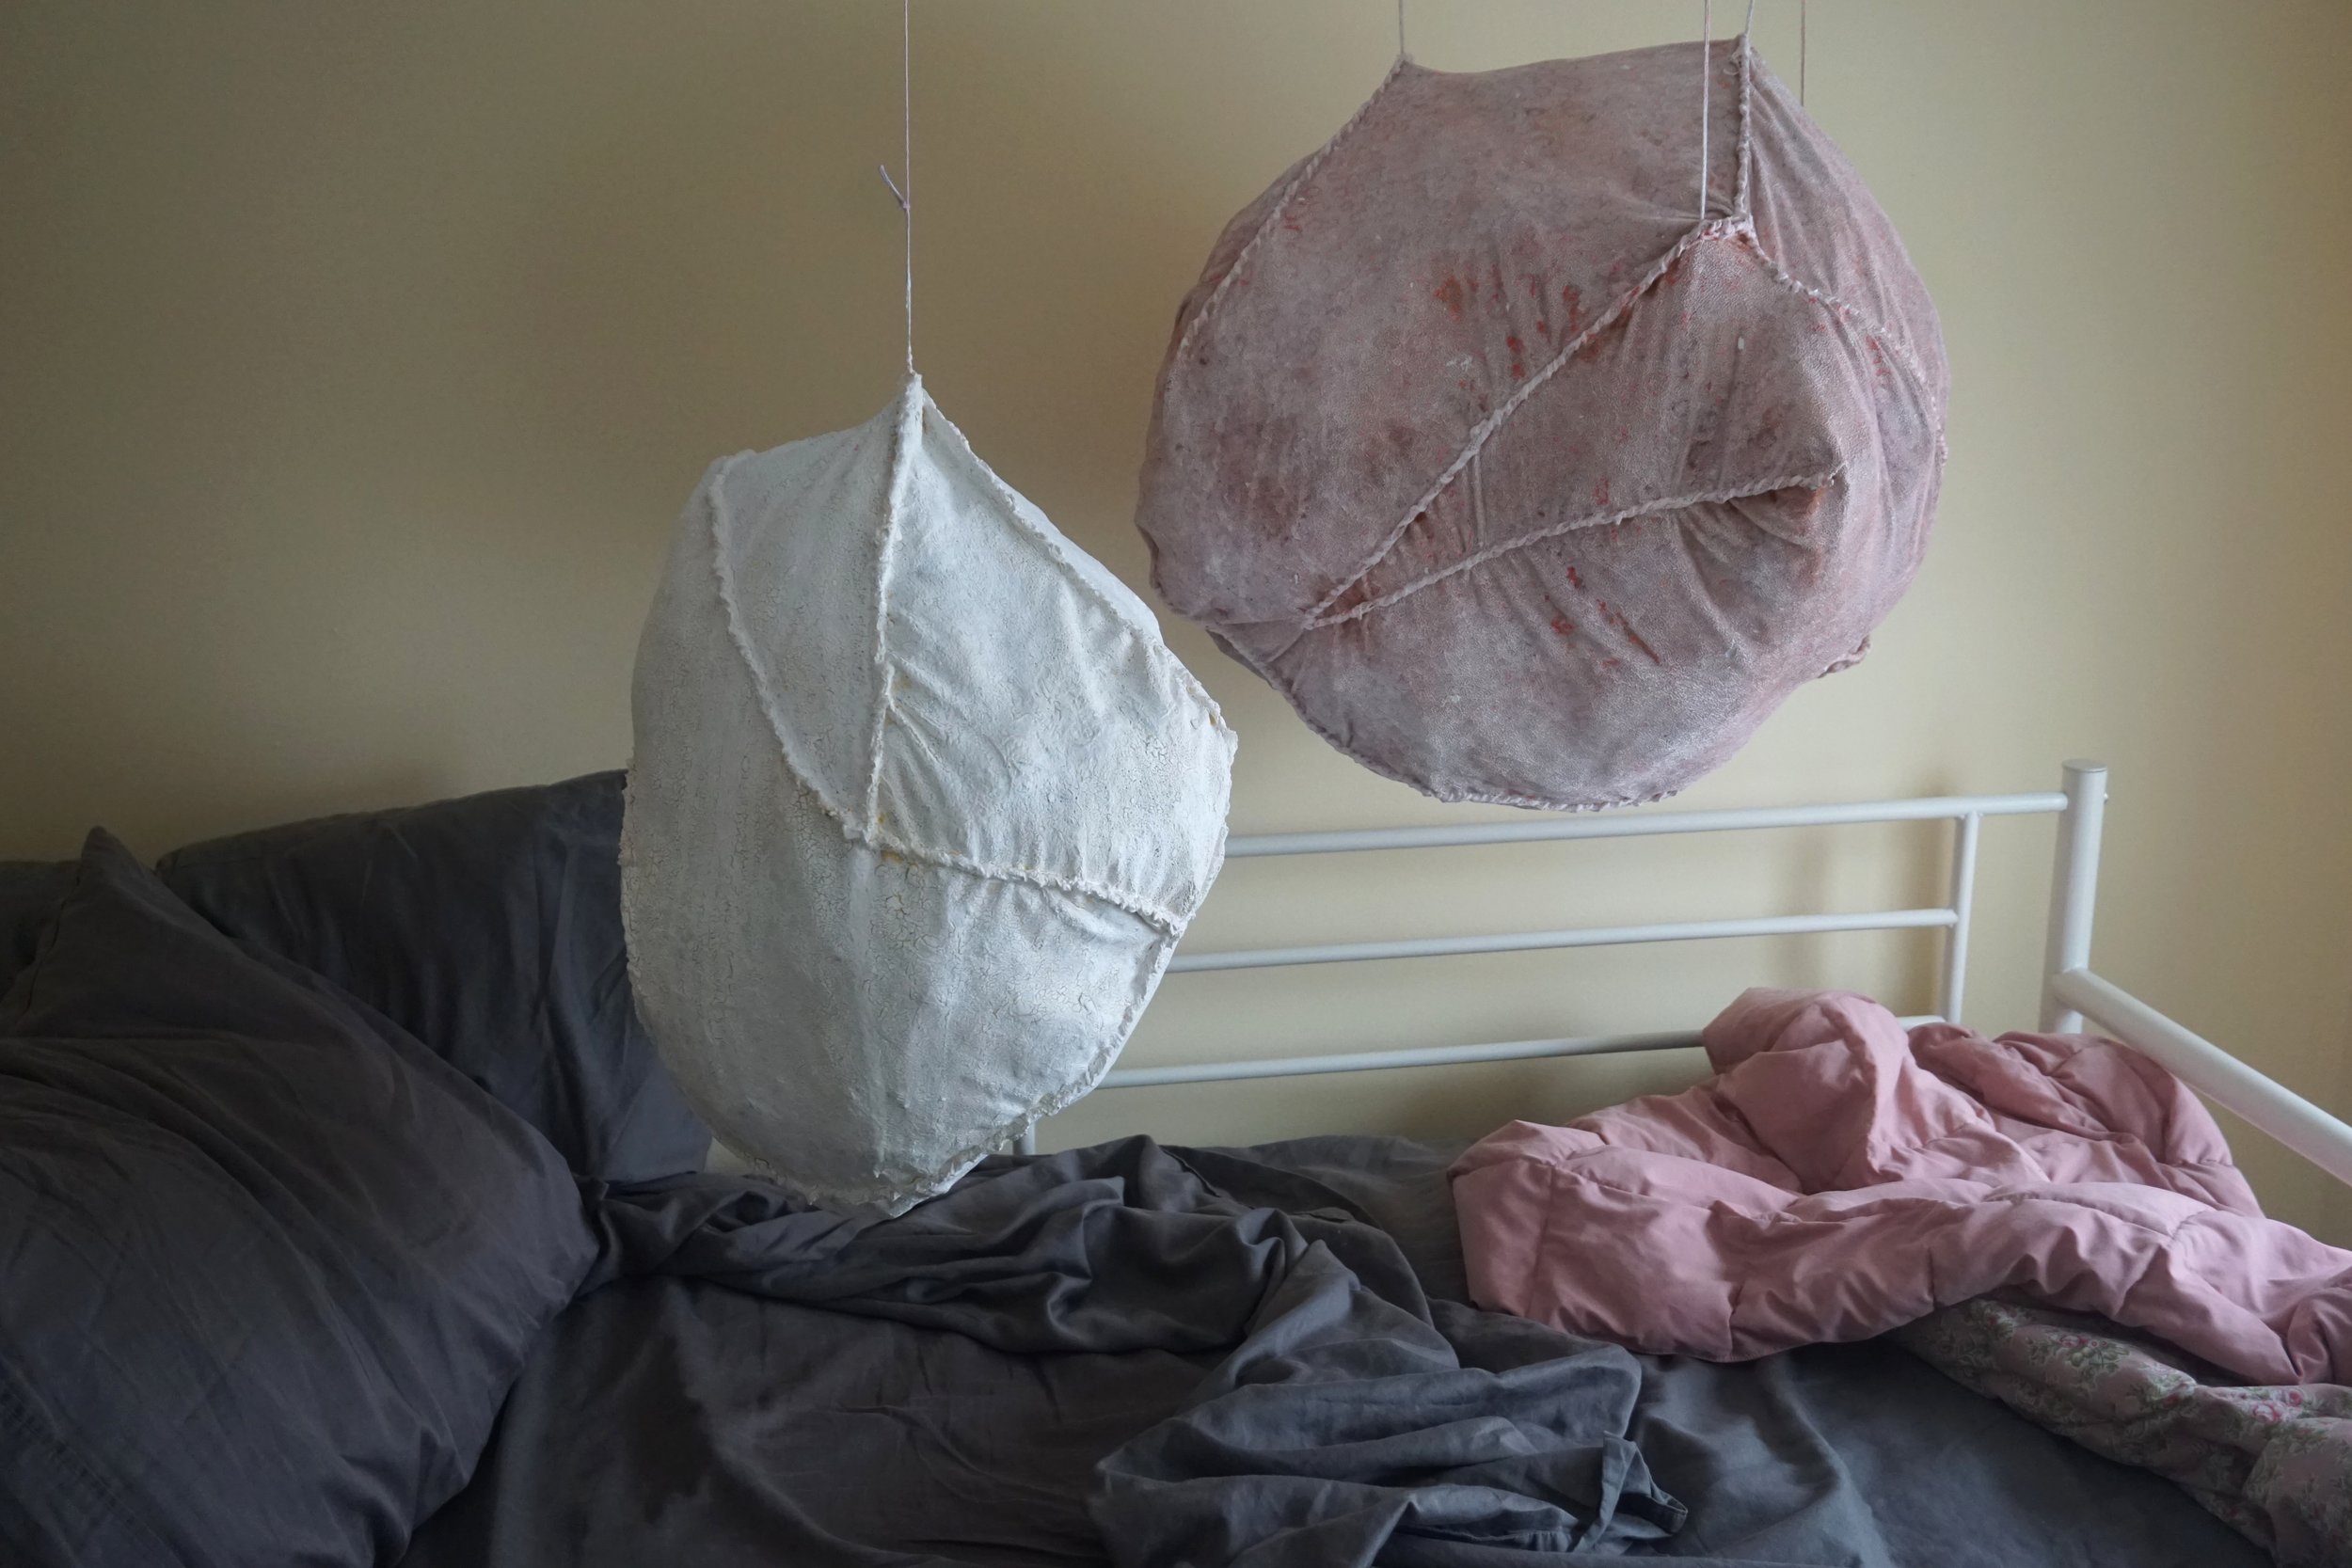  These   Pods   are occupying my bed. Two roughly stitched and encrusted pods,  appear to levitate above my bed. This project taught me how important presentation and documentation of work can be. The environment it is displayed in changes the narrat